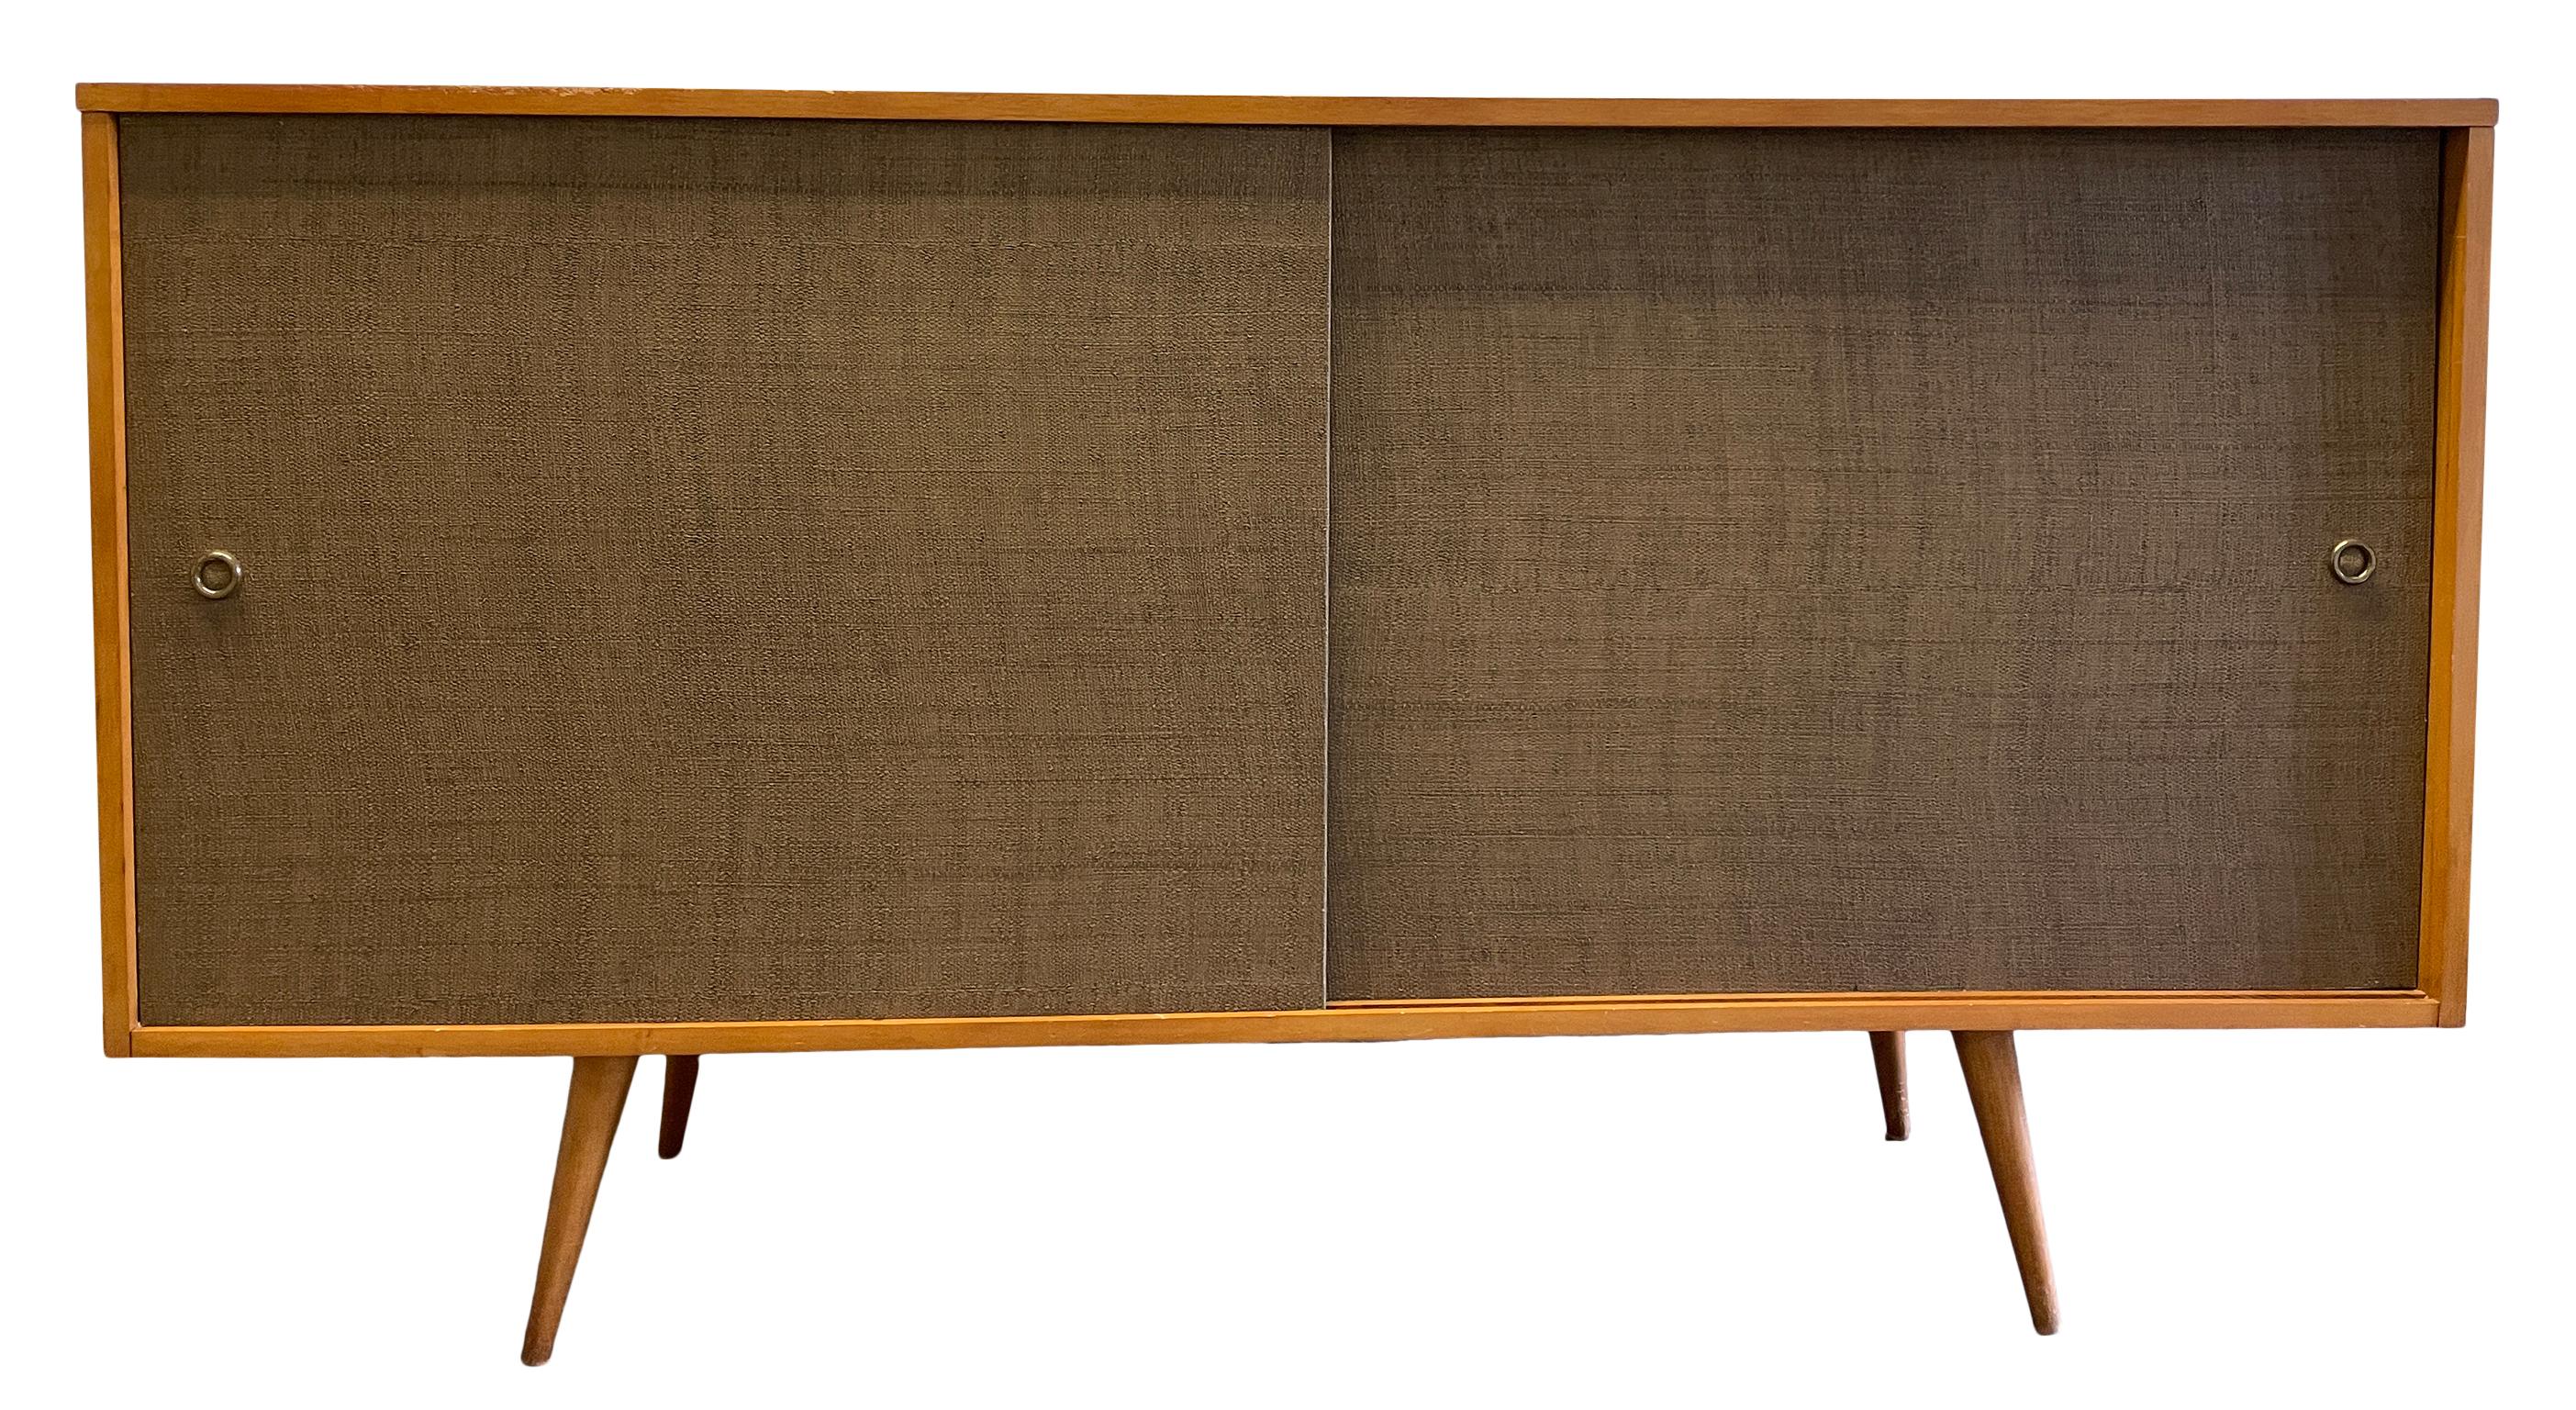 Midcentury Credenza Paul McCobb Planner Group #1514 Blonde Maple For Sale 3